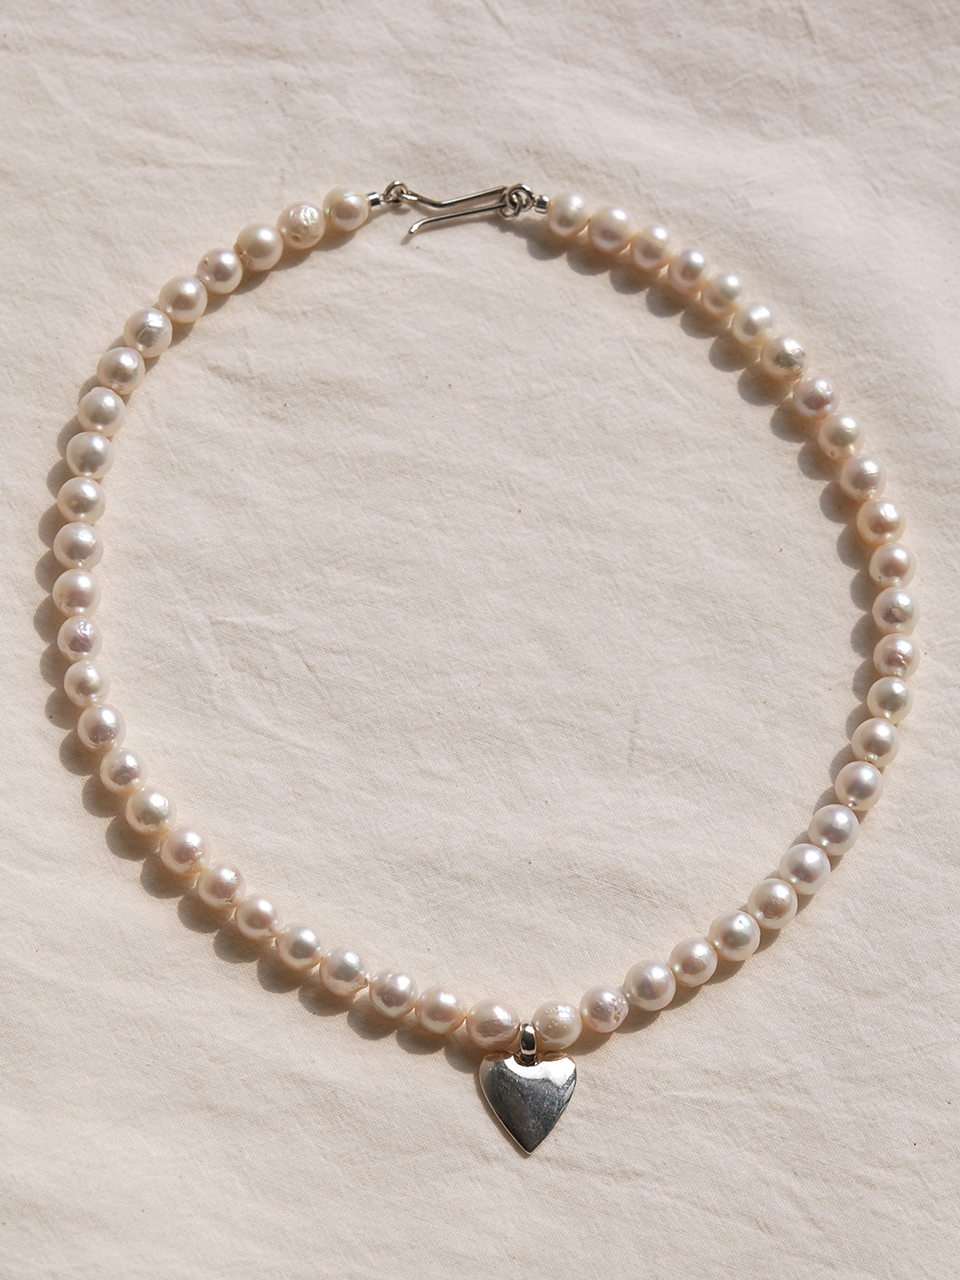 Heart with freshwater pearls necklace